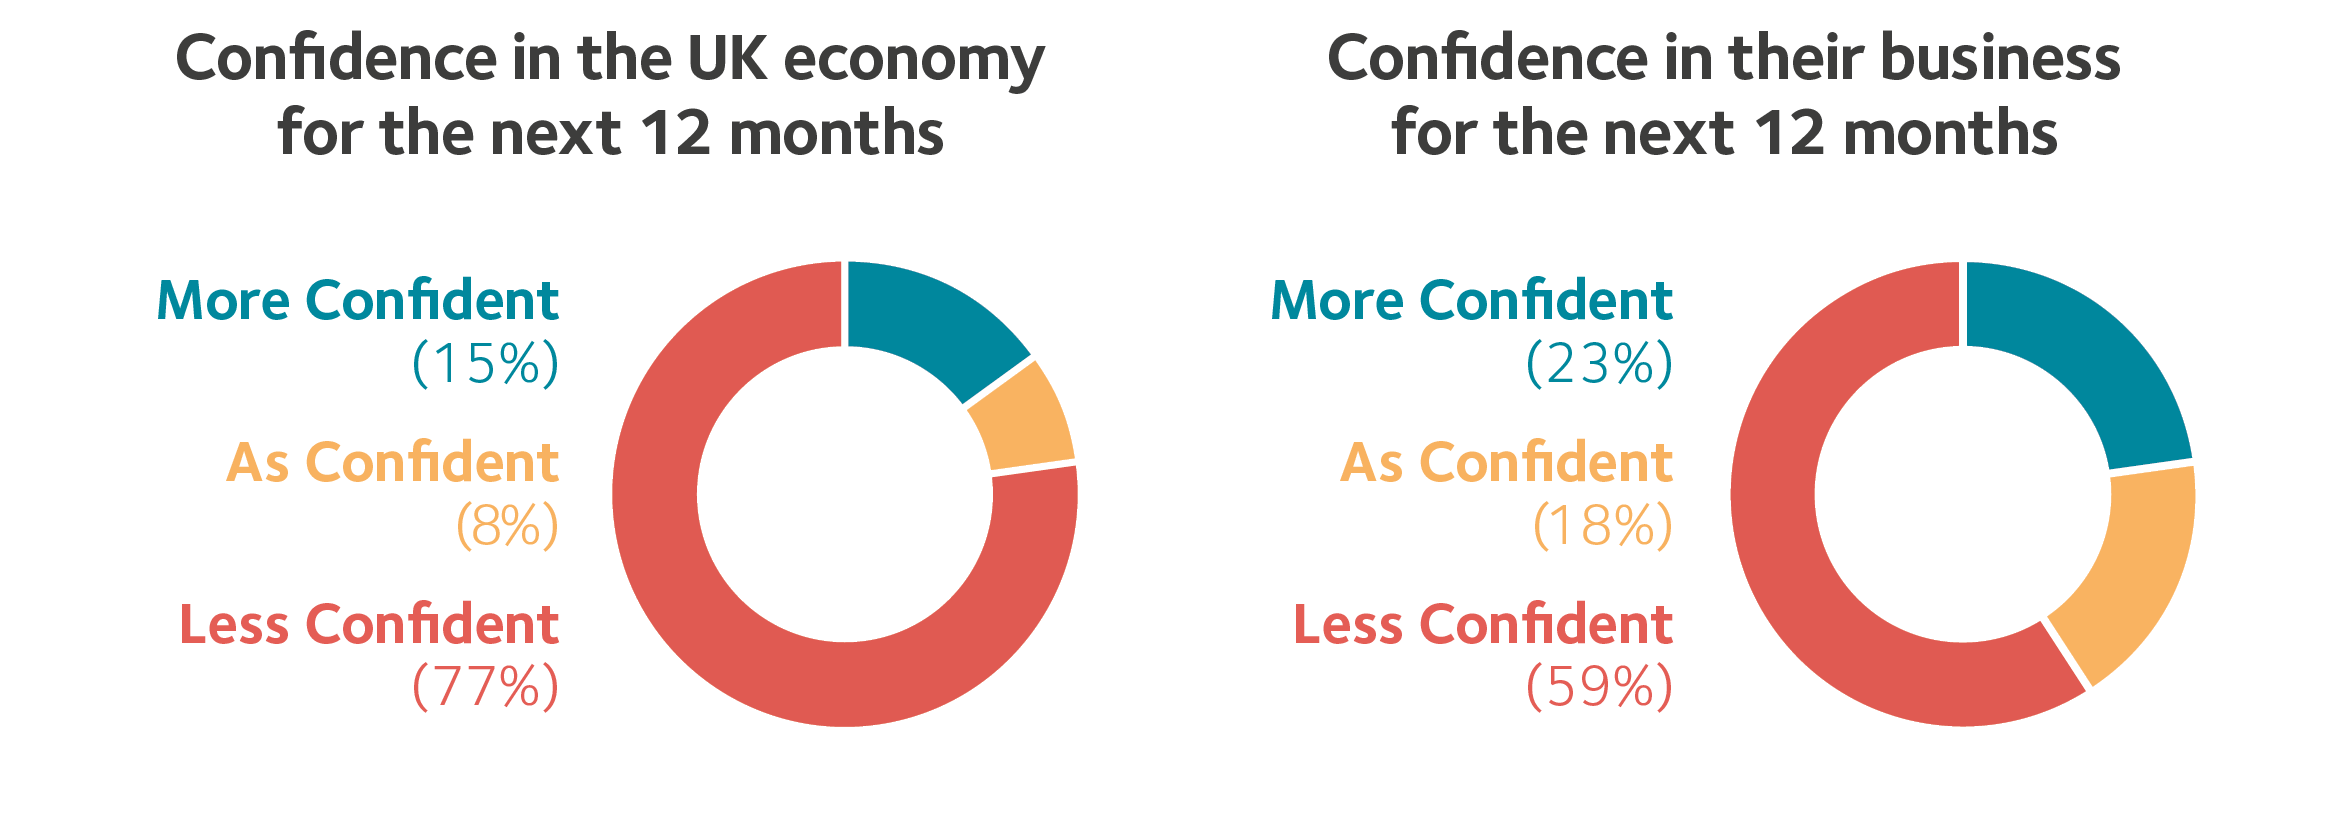 Confidence-Index-2020-Q2-image1.png